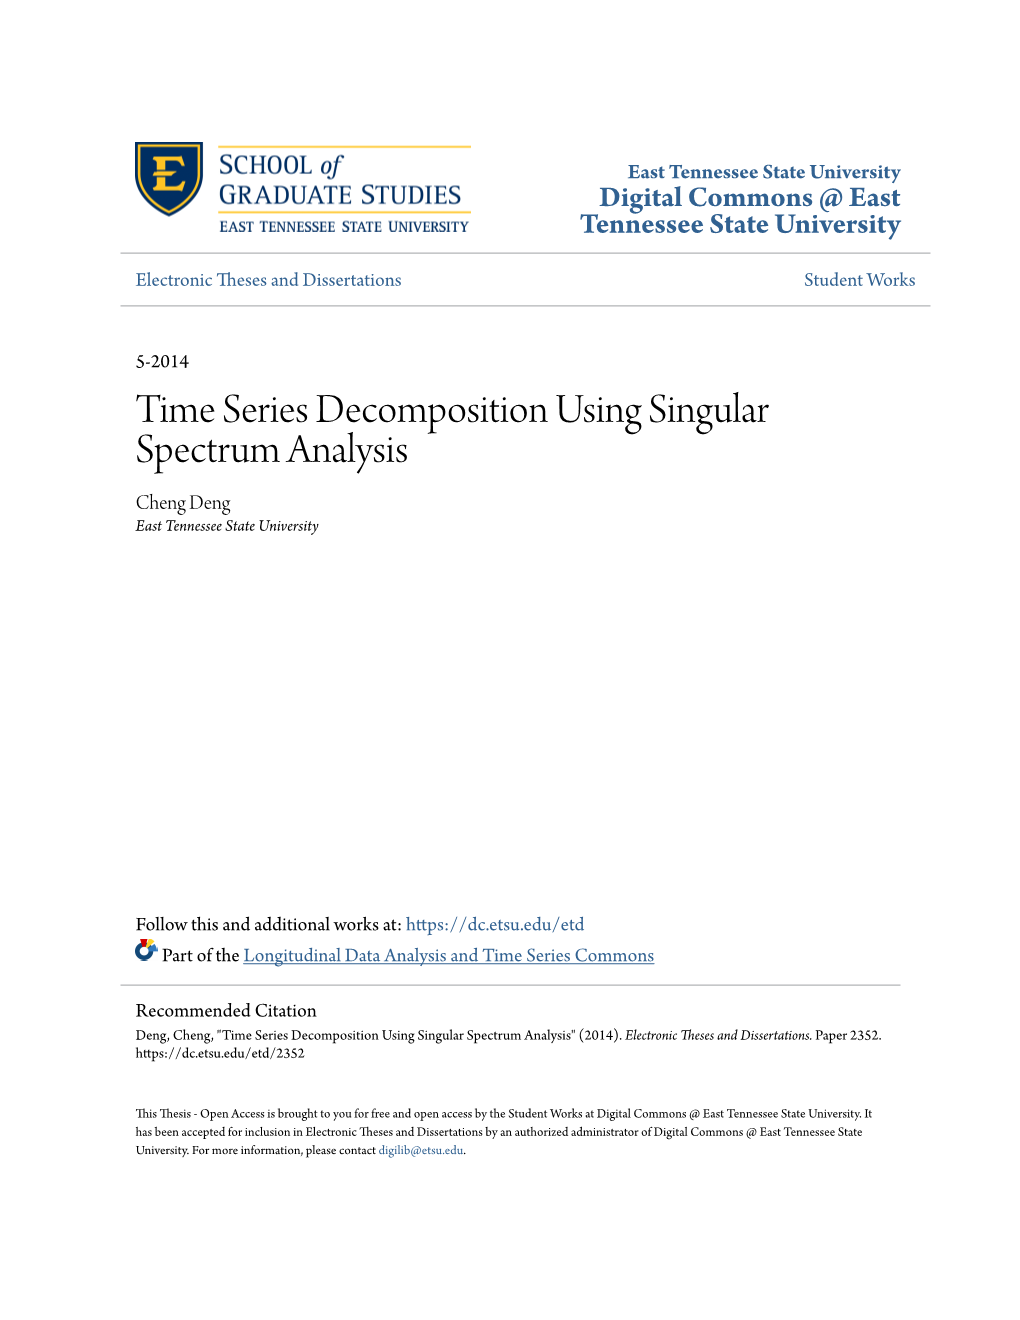 Time Series Decomposition Using Singular Spectrum Analysis Cheng Deng East Tennessee State University